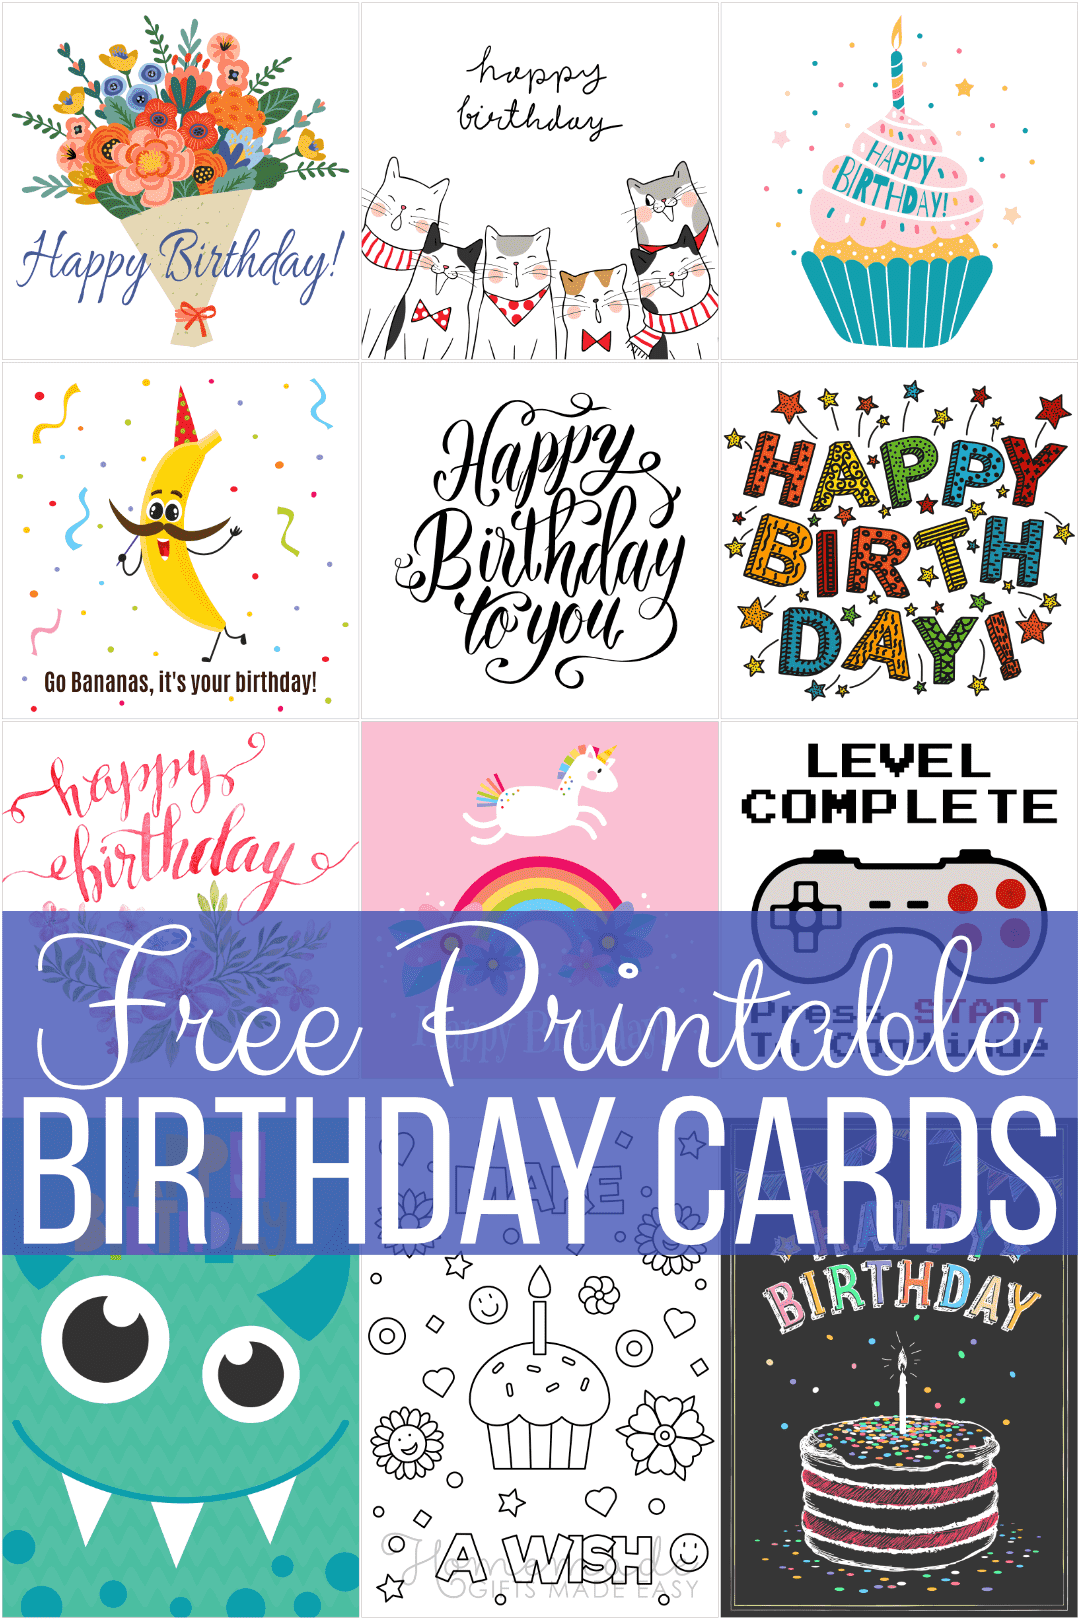 Instant download PDF Happy Birthday card template Birthday cards for kids Happy Birthday printable Card